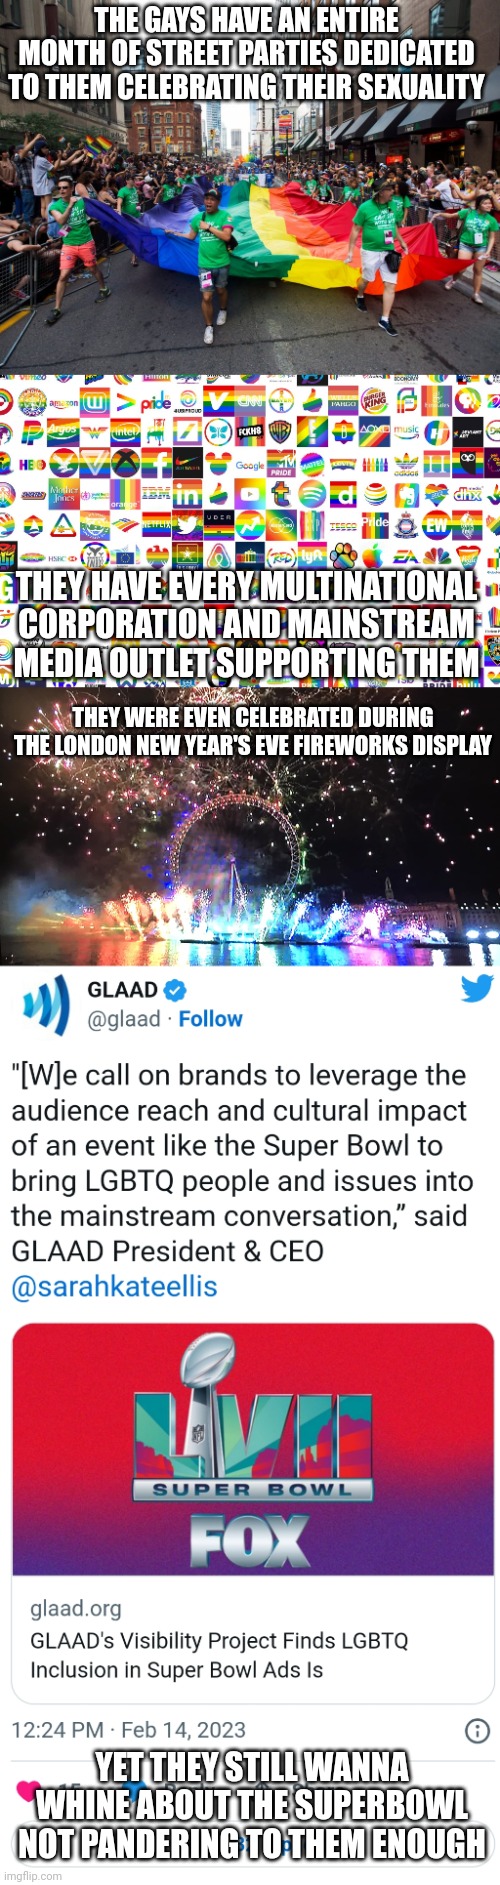 GLAAD's latest whine | THE GAYS HAVE AN ENTIRE MONTH OF STREET PARTIES DEDICATED TO THEM CELEBRATING THEIR SEXUALITY; THEY HAVE EVERY MULTINATIONAL CORPORATION AND MAINSTREAM MEDIA OUTLET SUPPORTING THEM; THEY WERE EVEN CELEBRATED DURING THE LONDON NEW YEAR'S EVE FIREWORKS DISPLAY; YET THEY STILL WANNA WHINE ABOUT THE SUPERBOWL NOT PANDERING TO THEM ENOUGH | image tagged in lgbtq,glaad,superbowl,sjws,stupid liberals,liberal logic | made w/ Imgflip meme maker